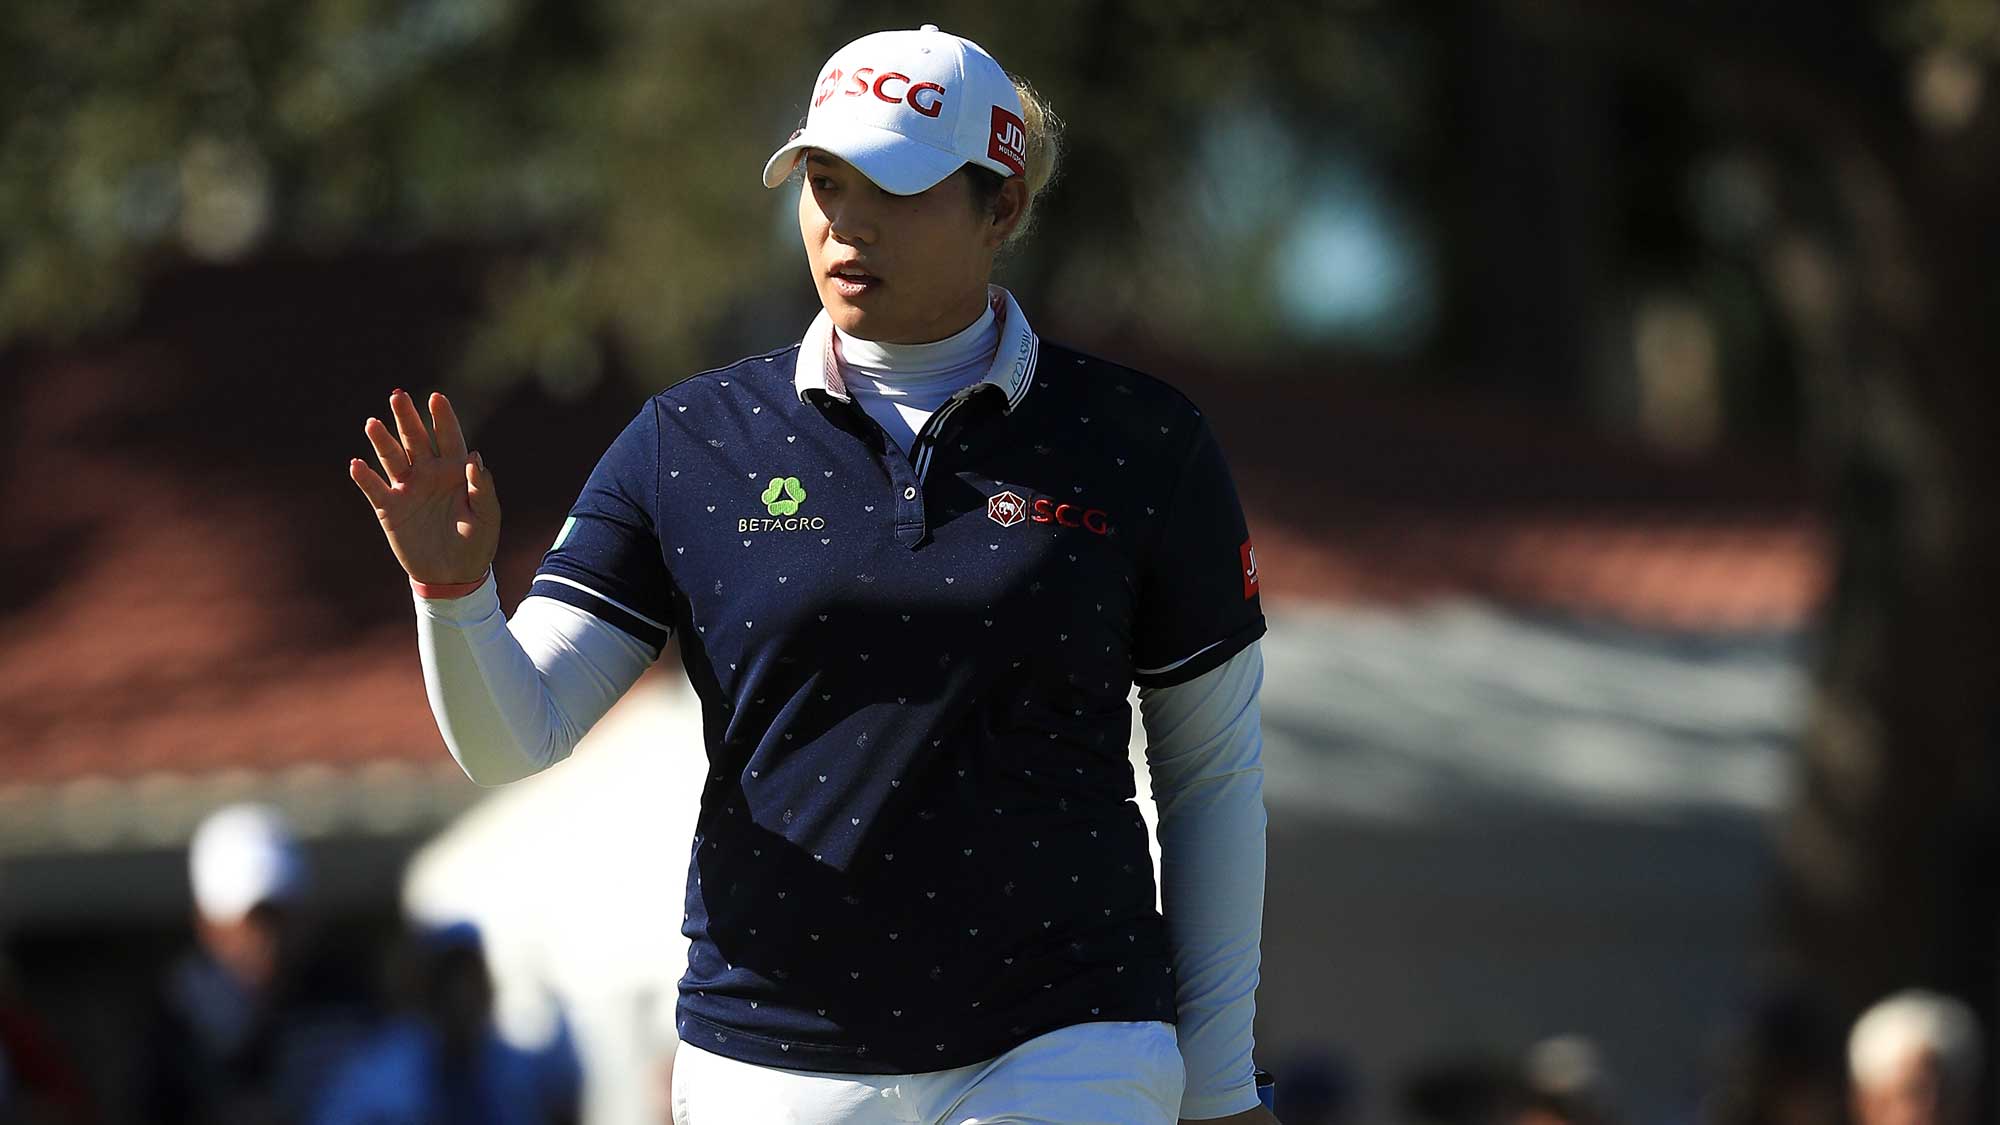 Ariya Jutanugarn of Thailand reacts after a putt on the 18th green during the second round of the CME Group Tour Championship